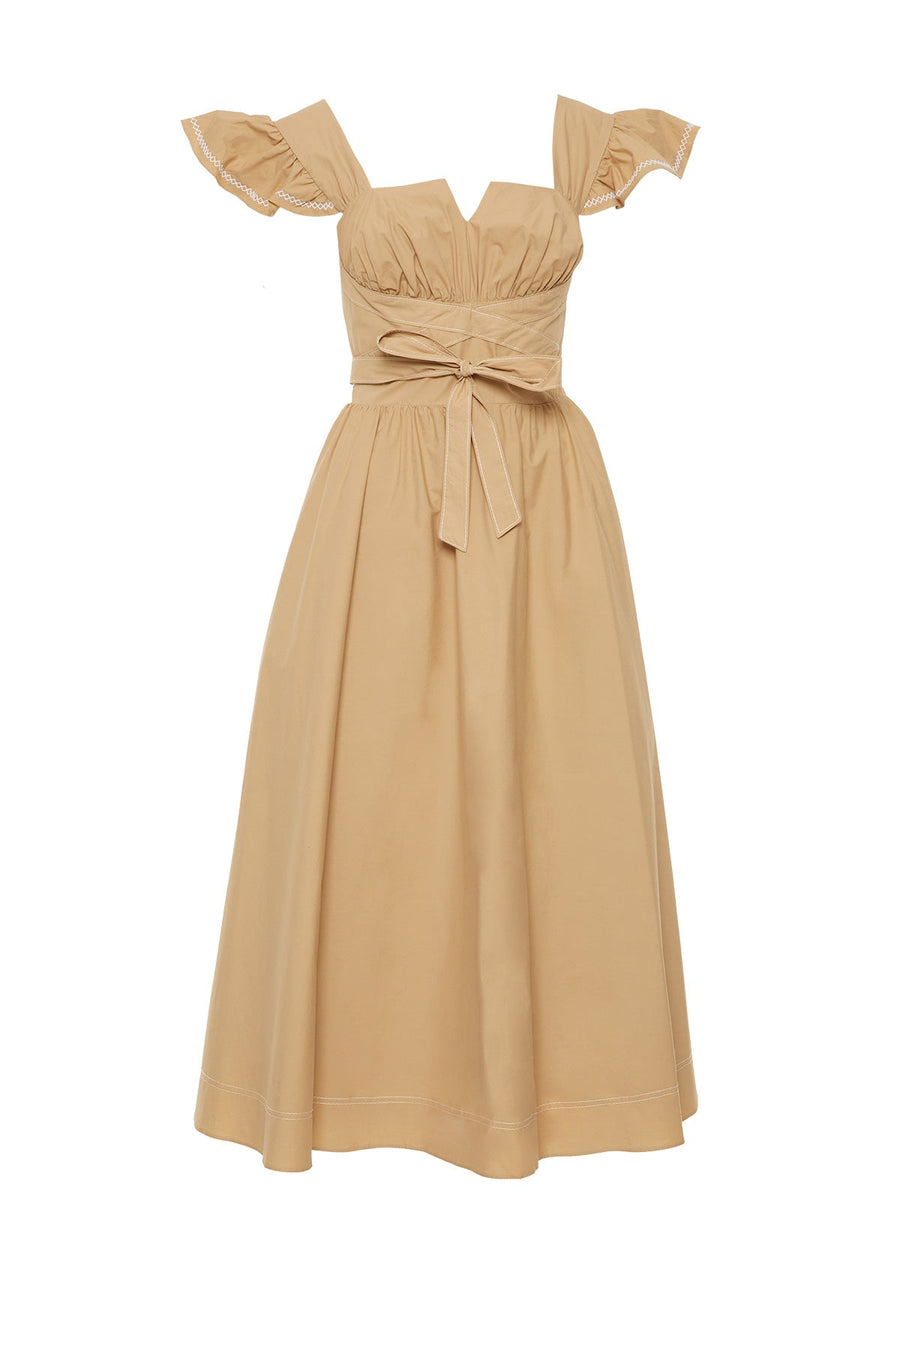 Beige Dress With Flywheel Sleeves And Fixed Waist Fastening